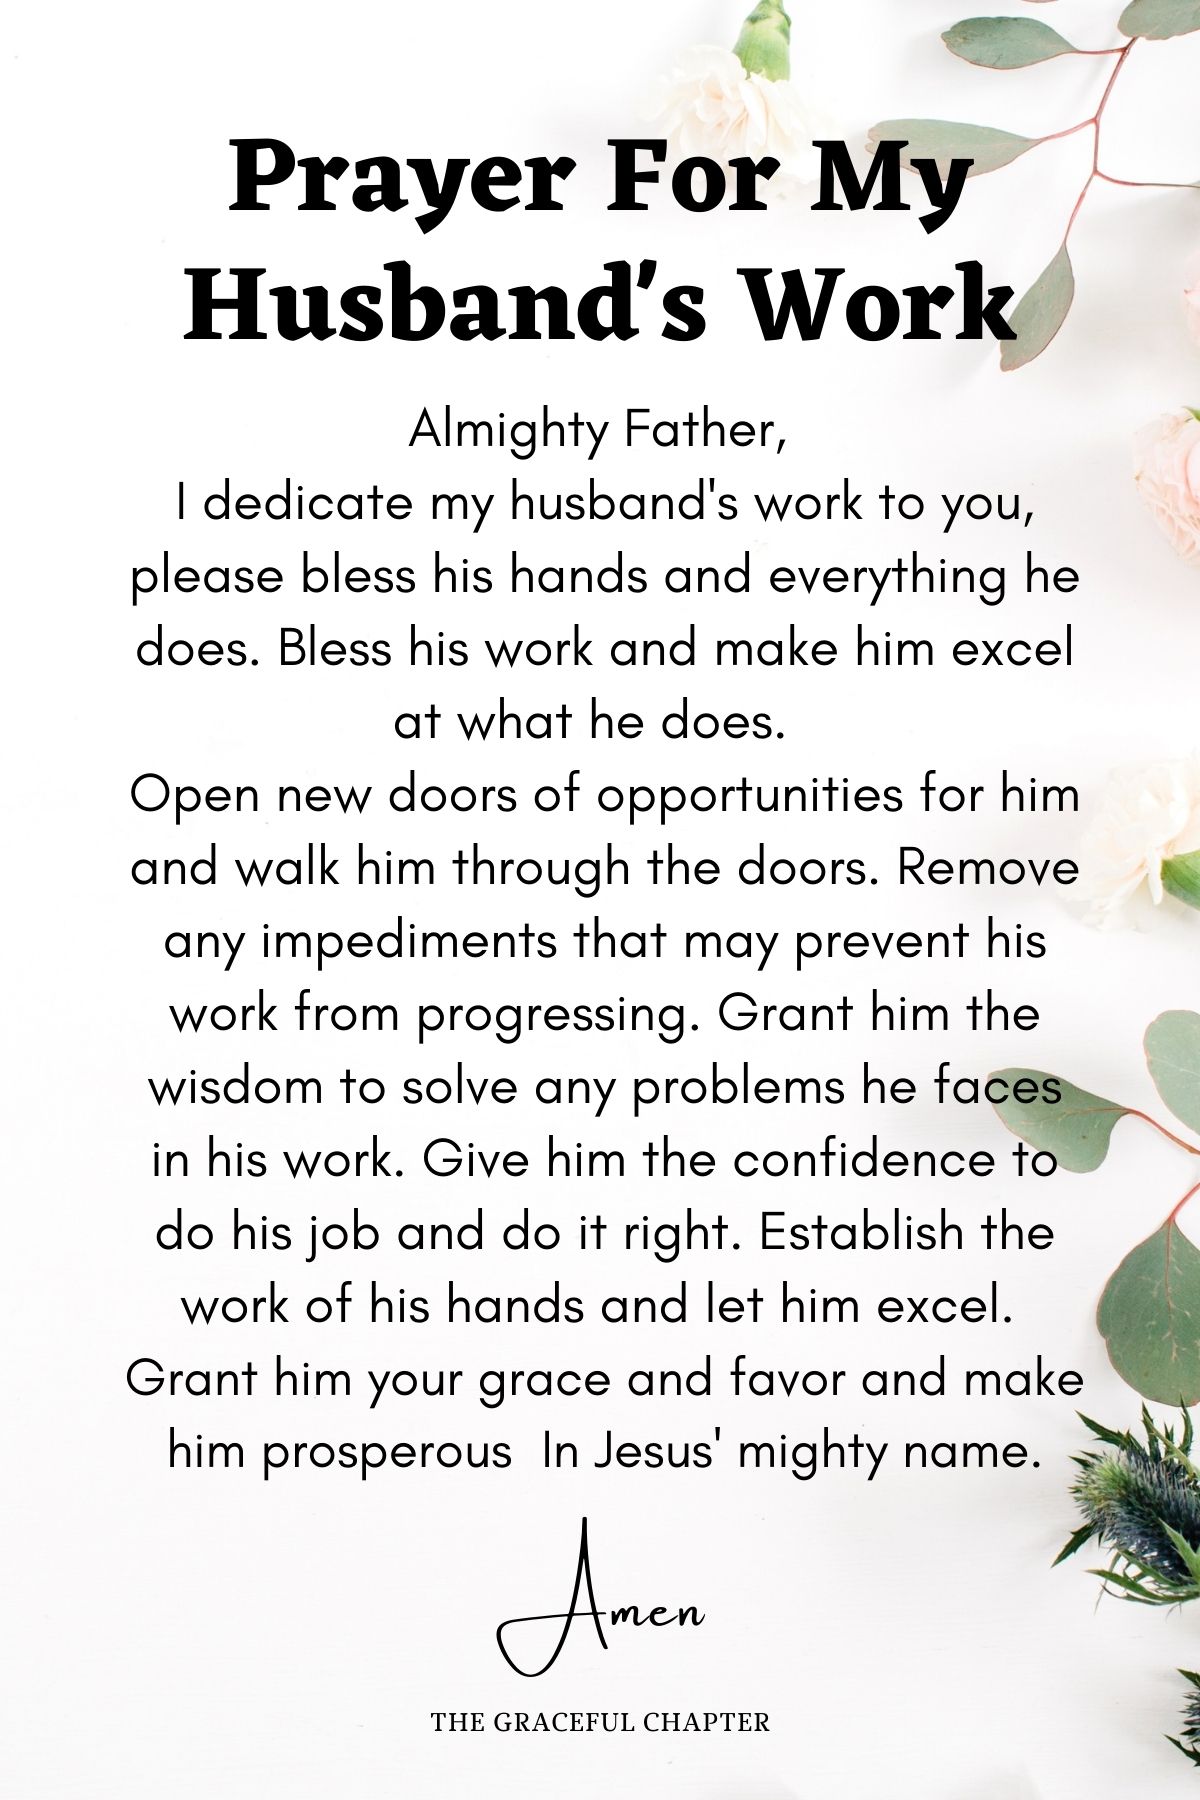 Prayer for your husband's work